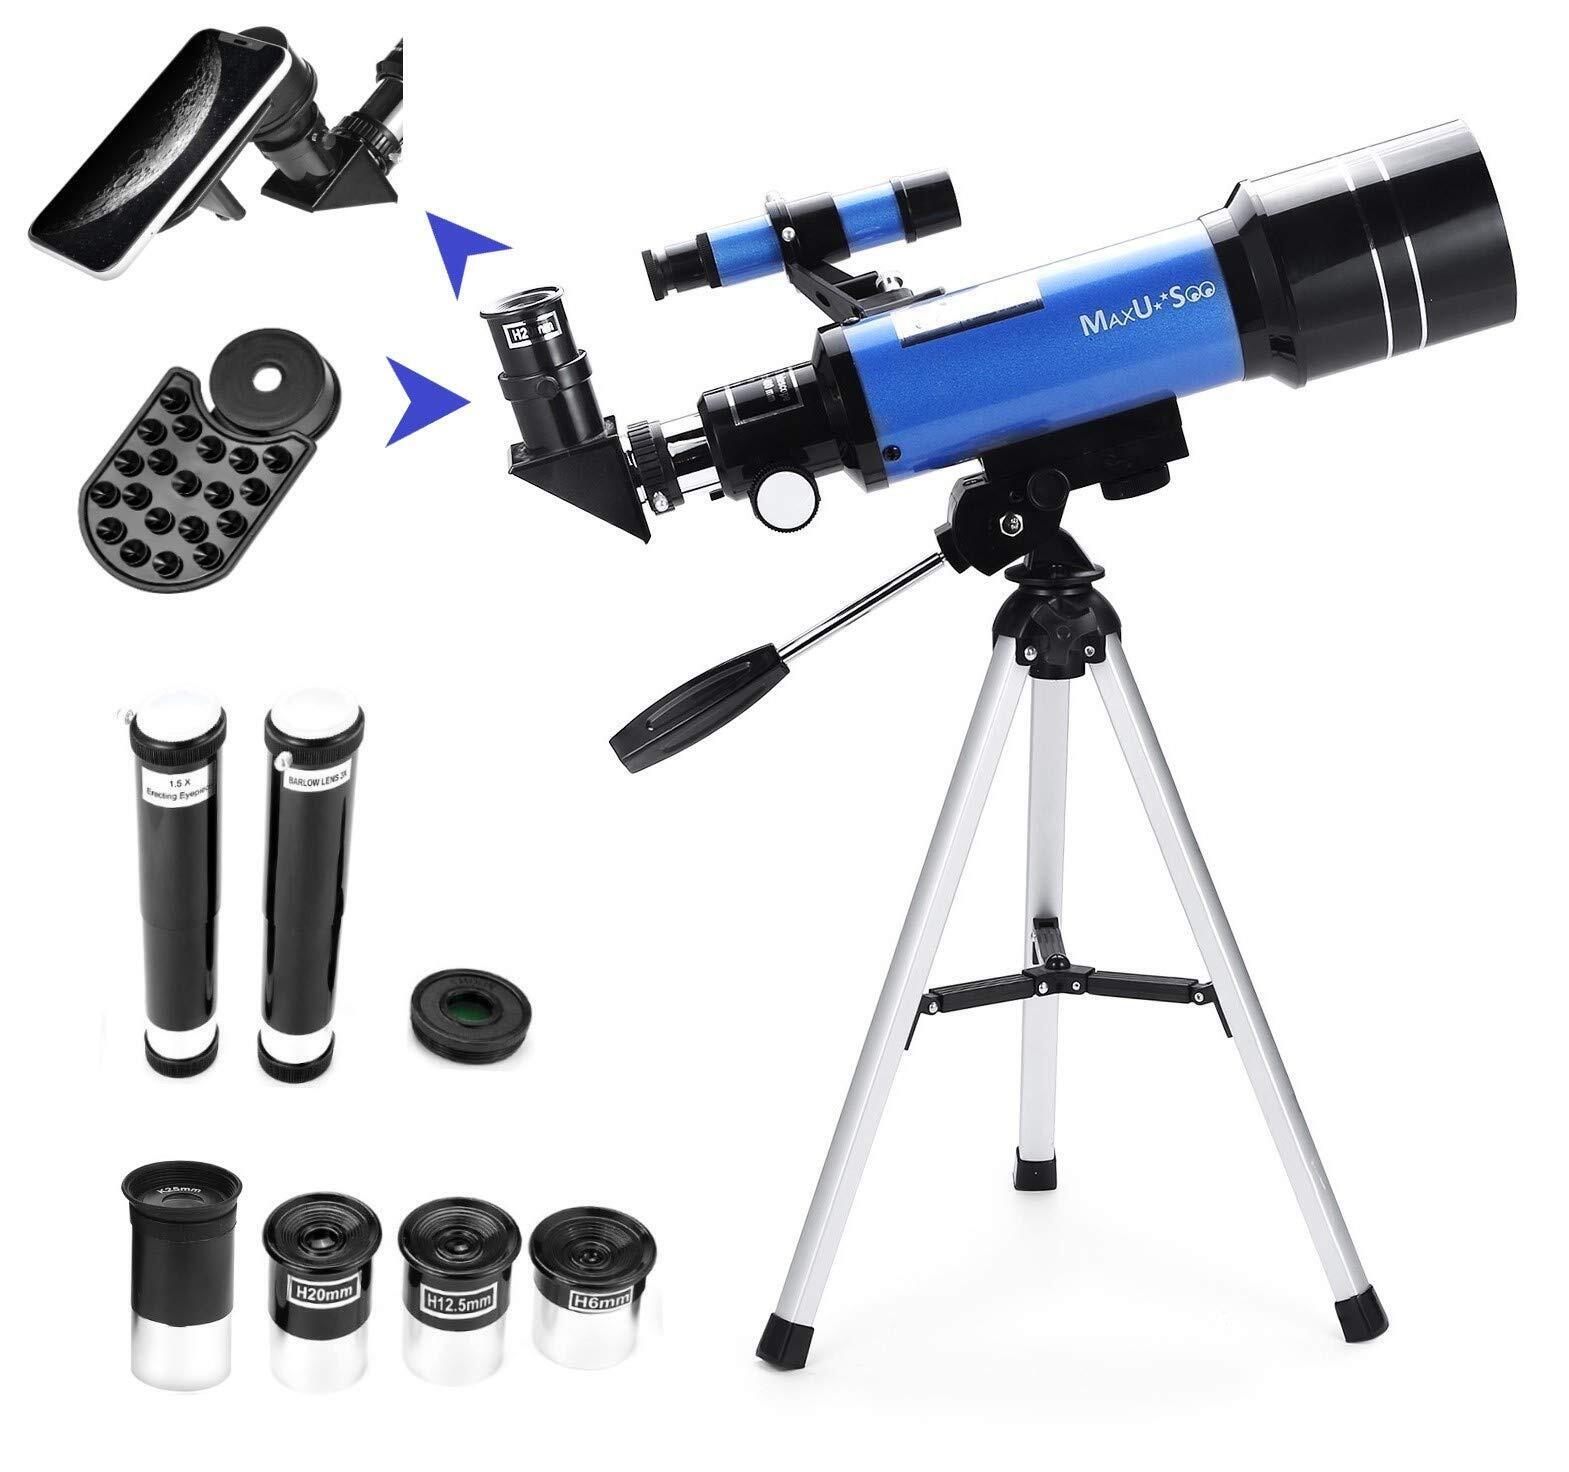 MaxUSee 70mm Telescope for & Astronomy Beginners, Refractor Telescope with Tr...